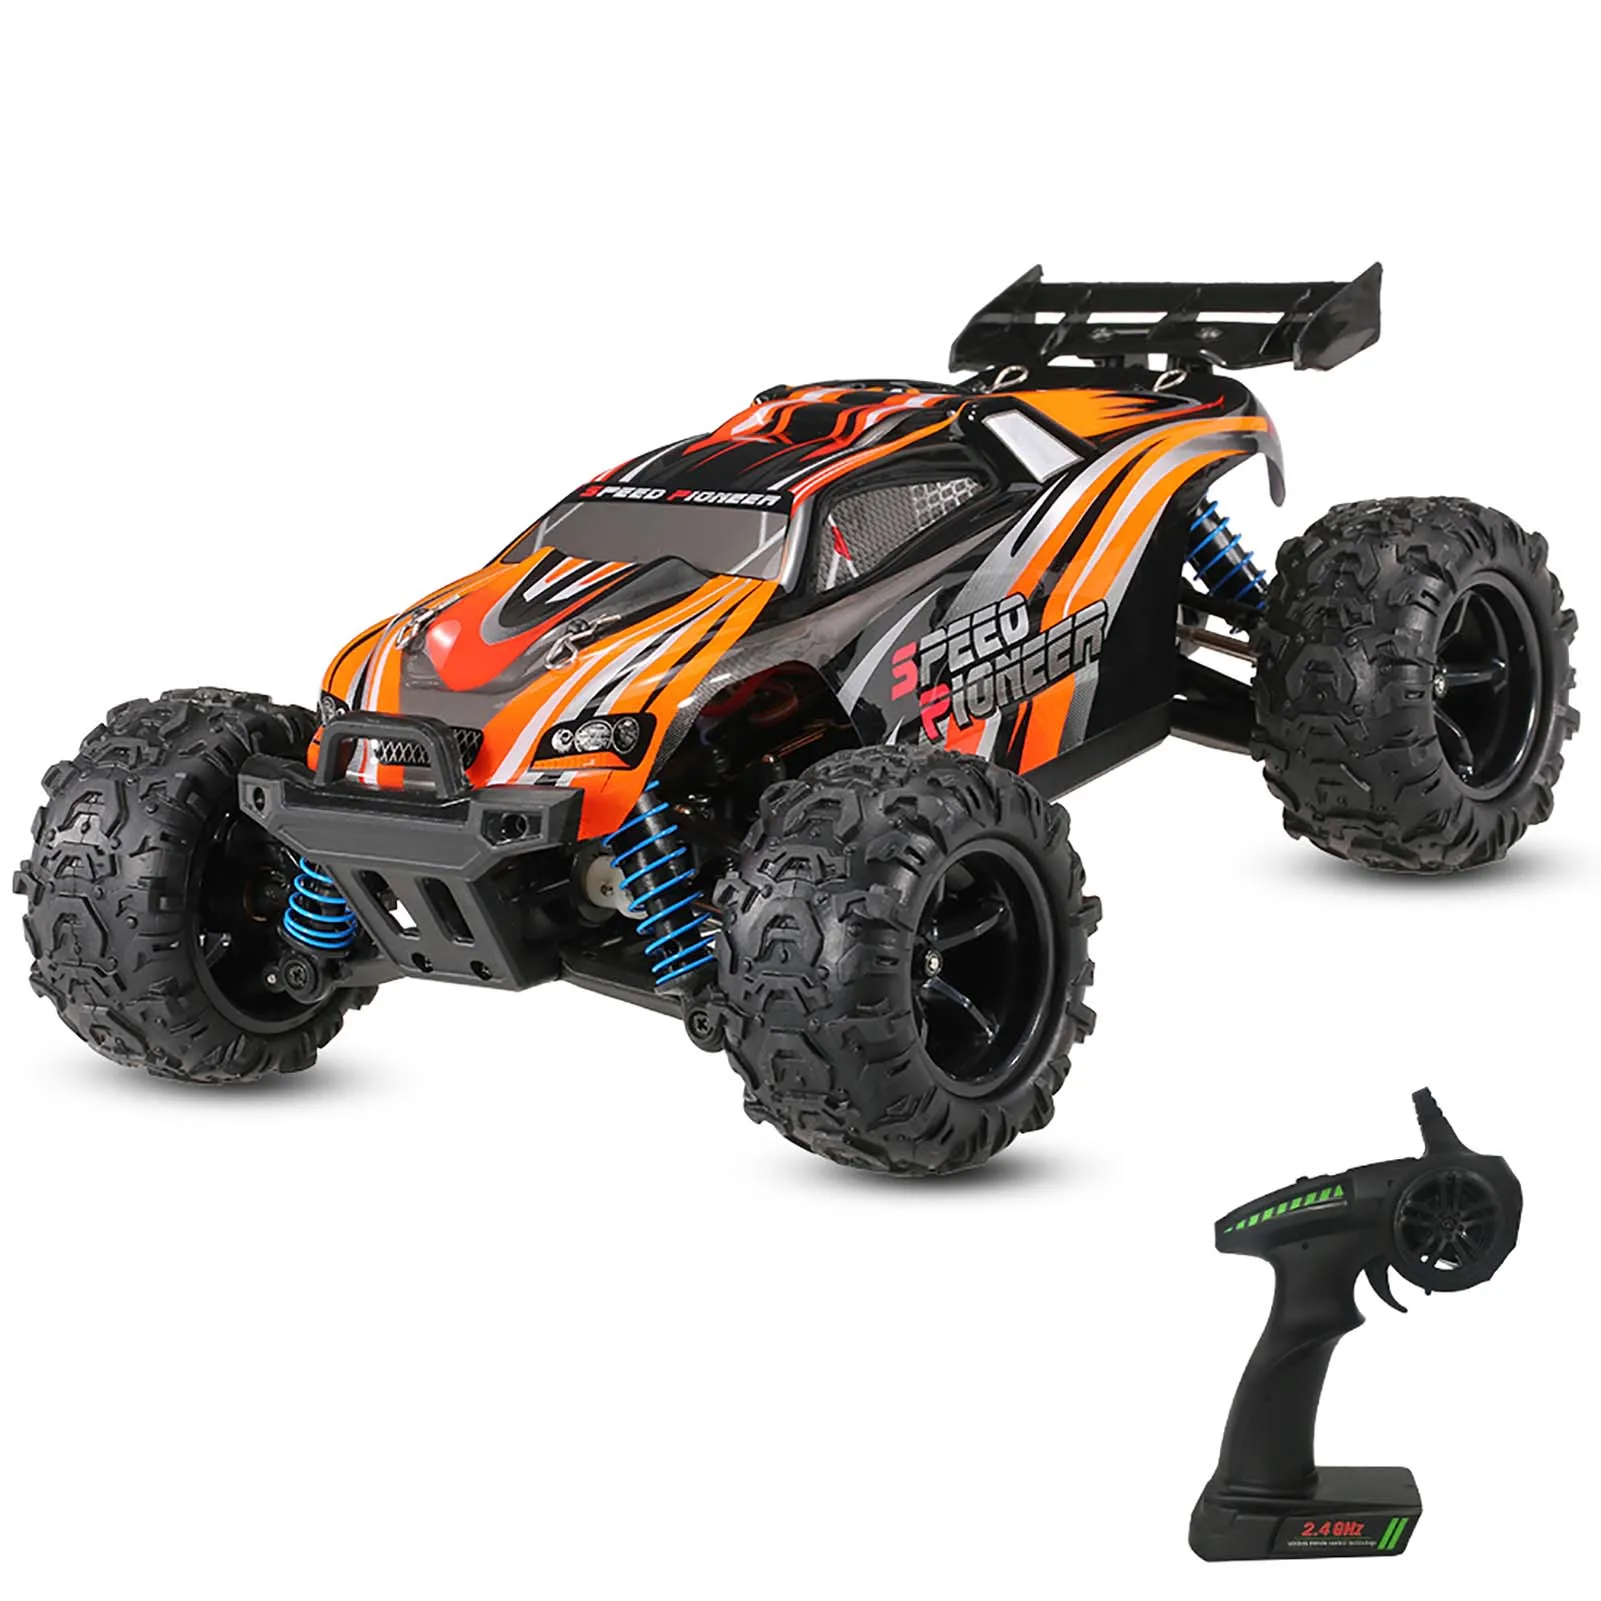 

PXtoys NO.9302 RC Crawler 1/18 2.4GHz 4WD Off-Road Truggy 40km/h High Speed RC Racing Car RTR Brushed motor Upgraded Version